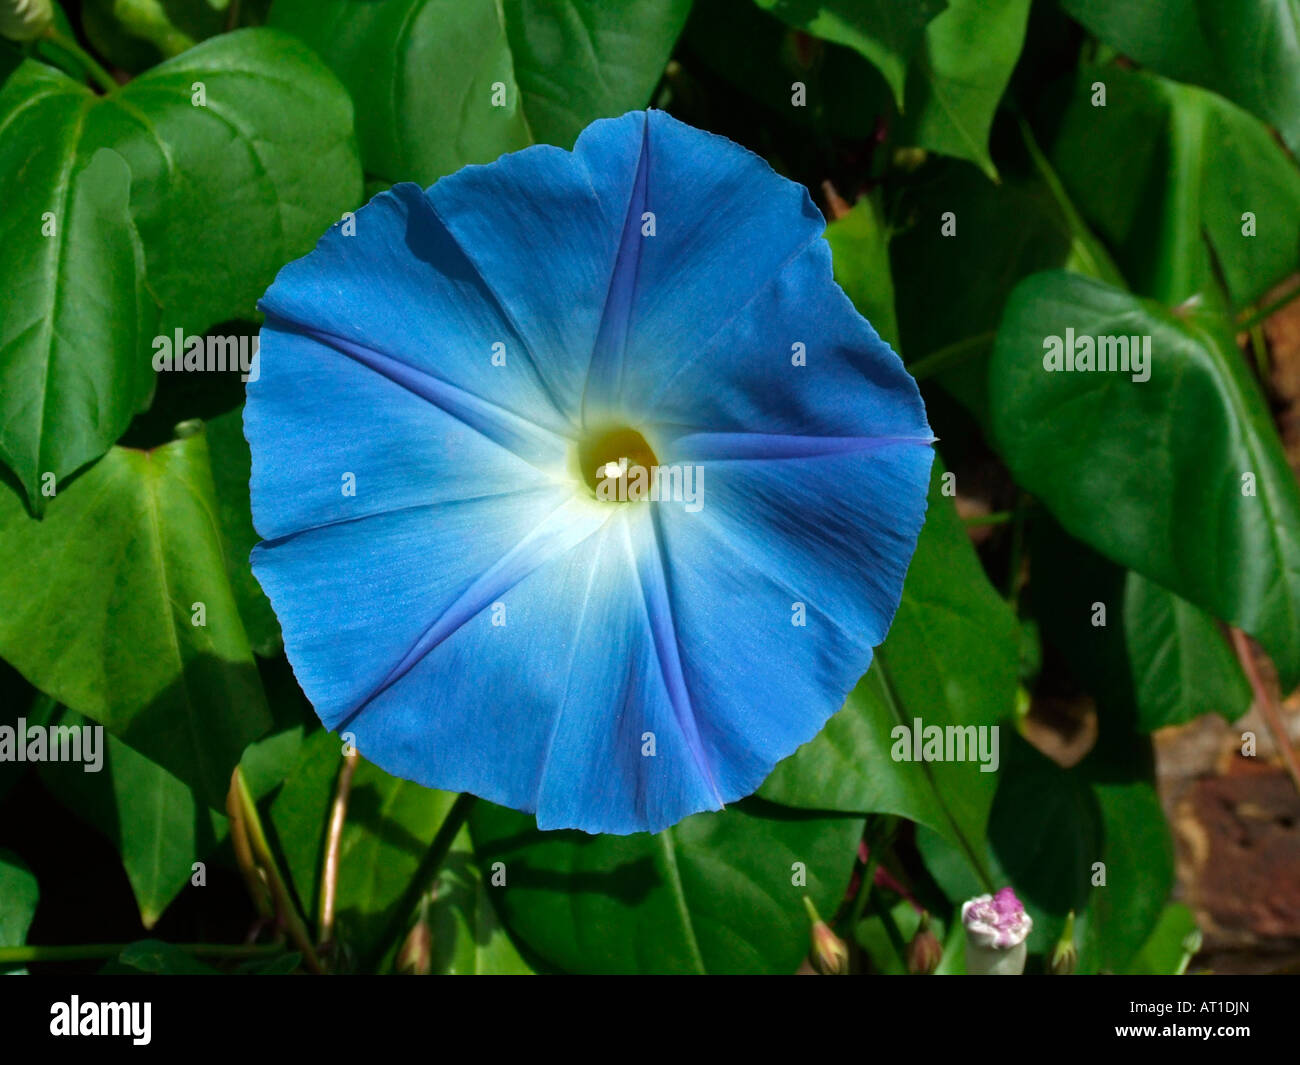 Ipomoea tricolor, Heavenly Blue, Morning glory Stock Photo